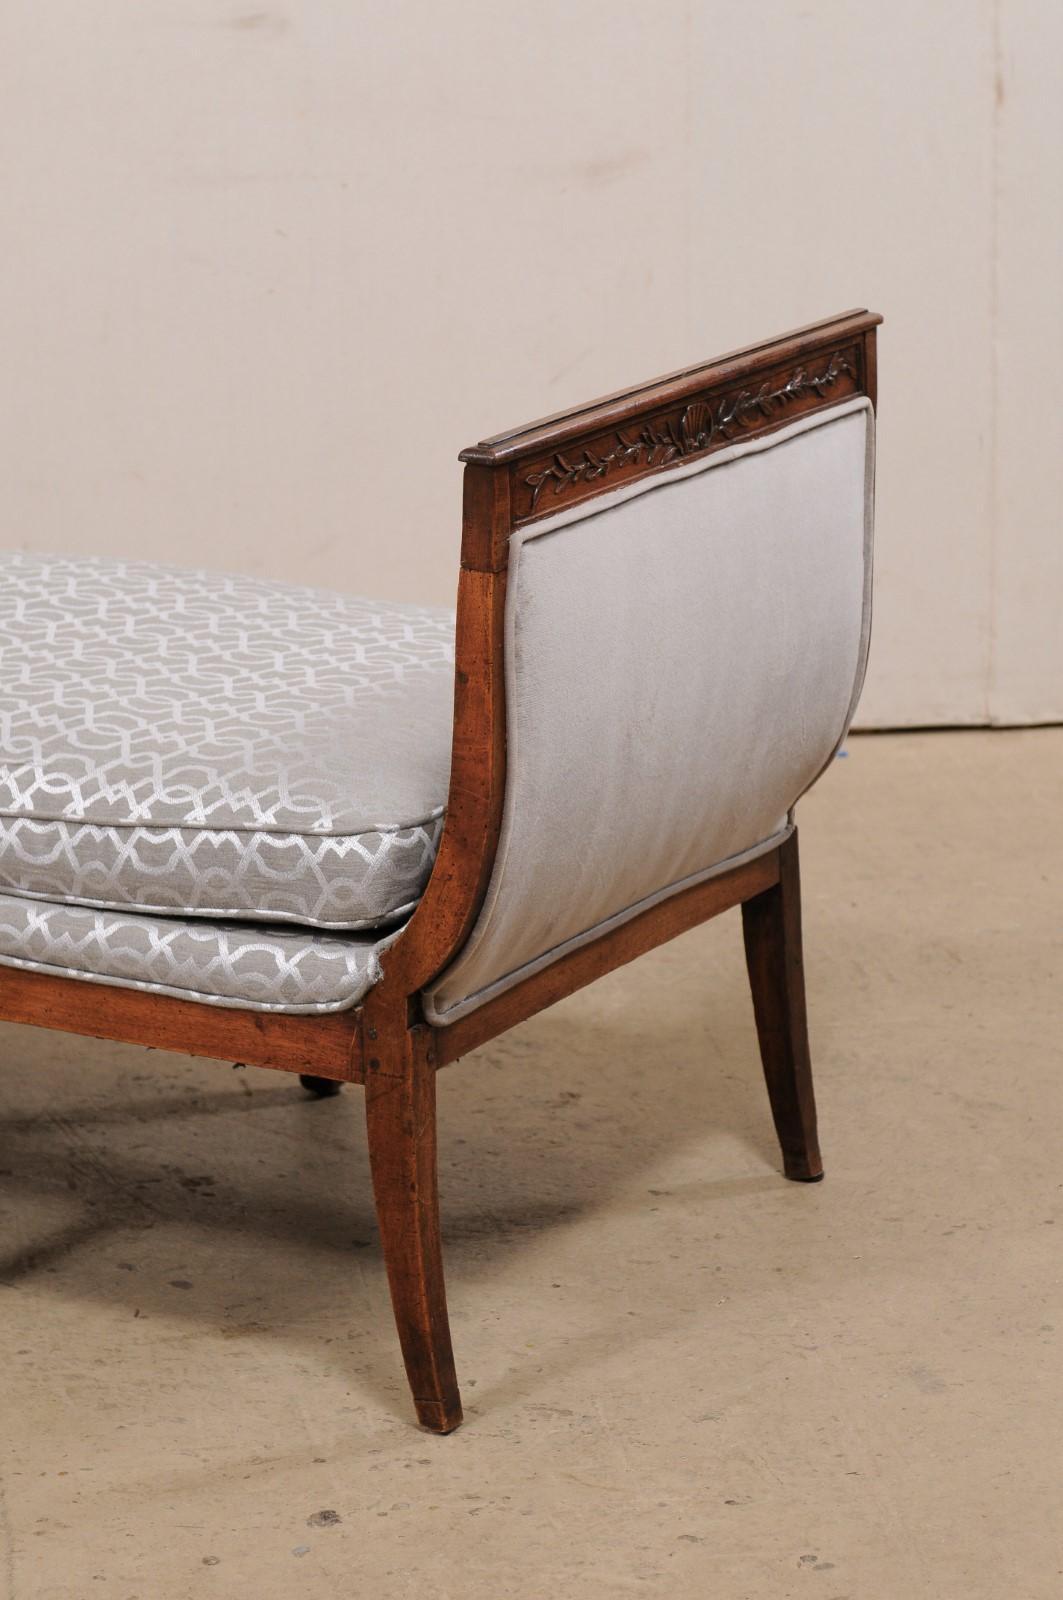 An Elegant French Duchesse en Bateau (Chaise) Newly Upholstered, 19th Century In Good Condition For Sale In Atlanta, GA